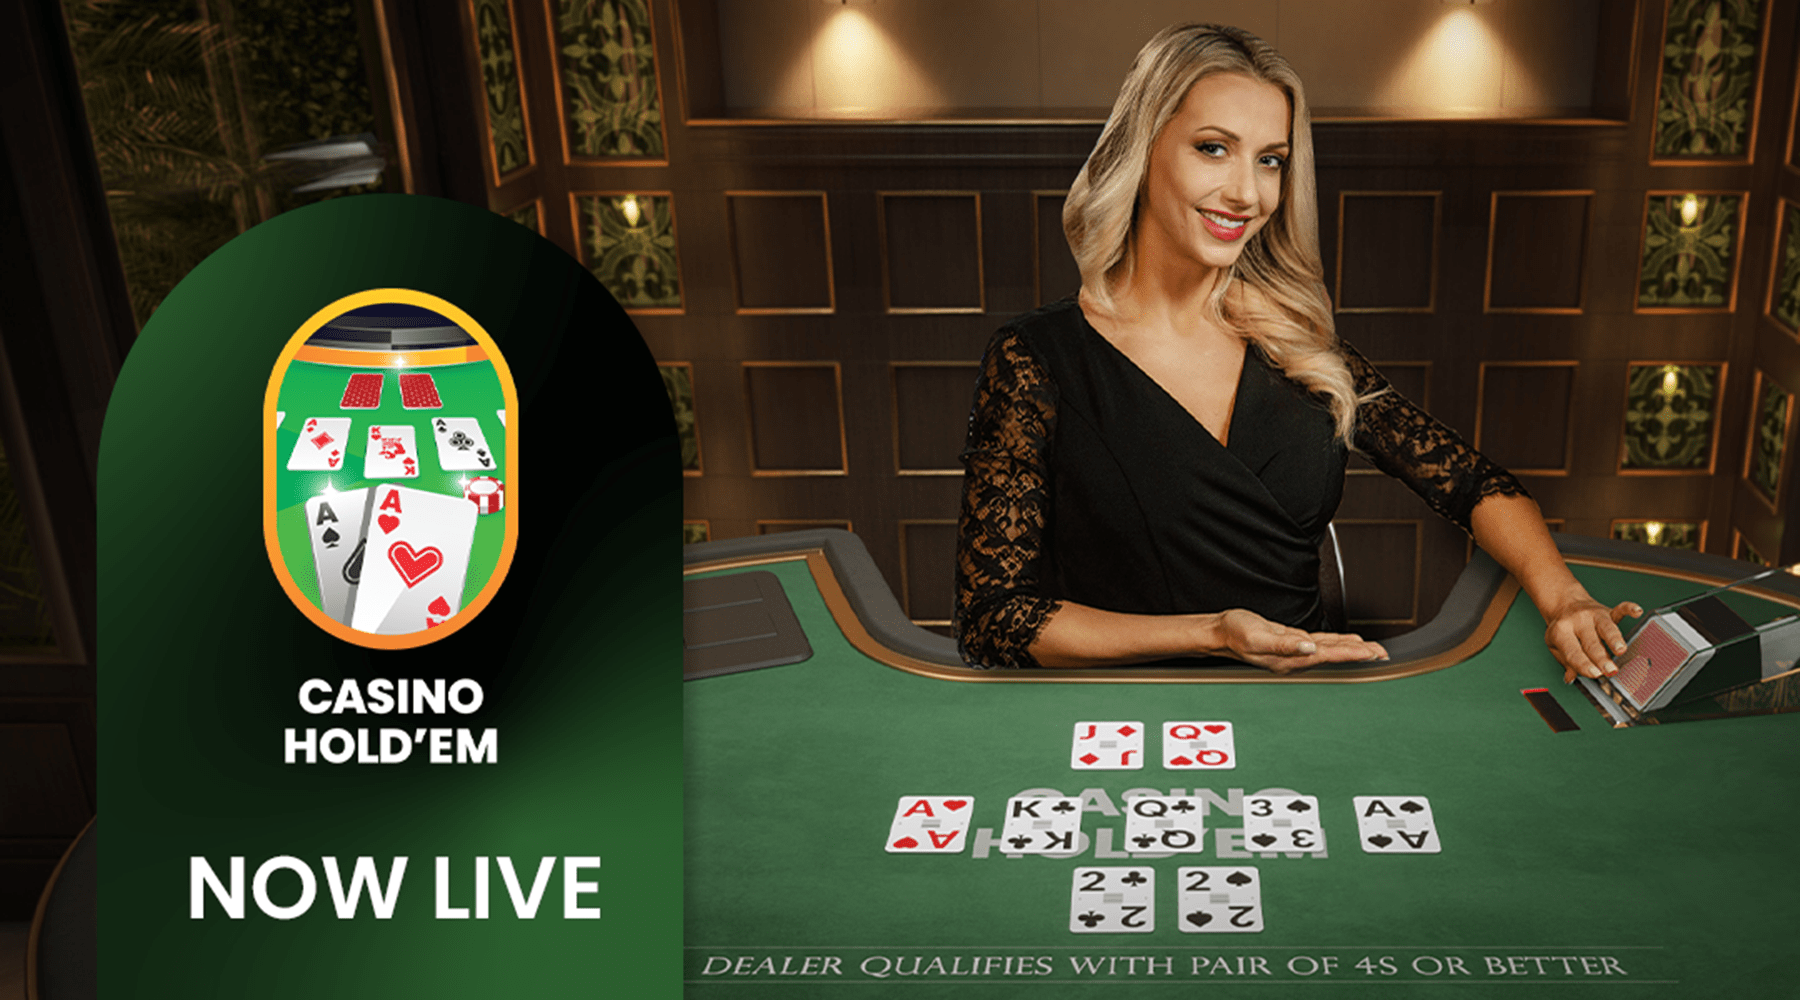 get-ready-to-hold-‘em!-introducing-our-latest-game-changer:-casino-hold-‘em